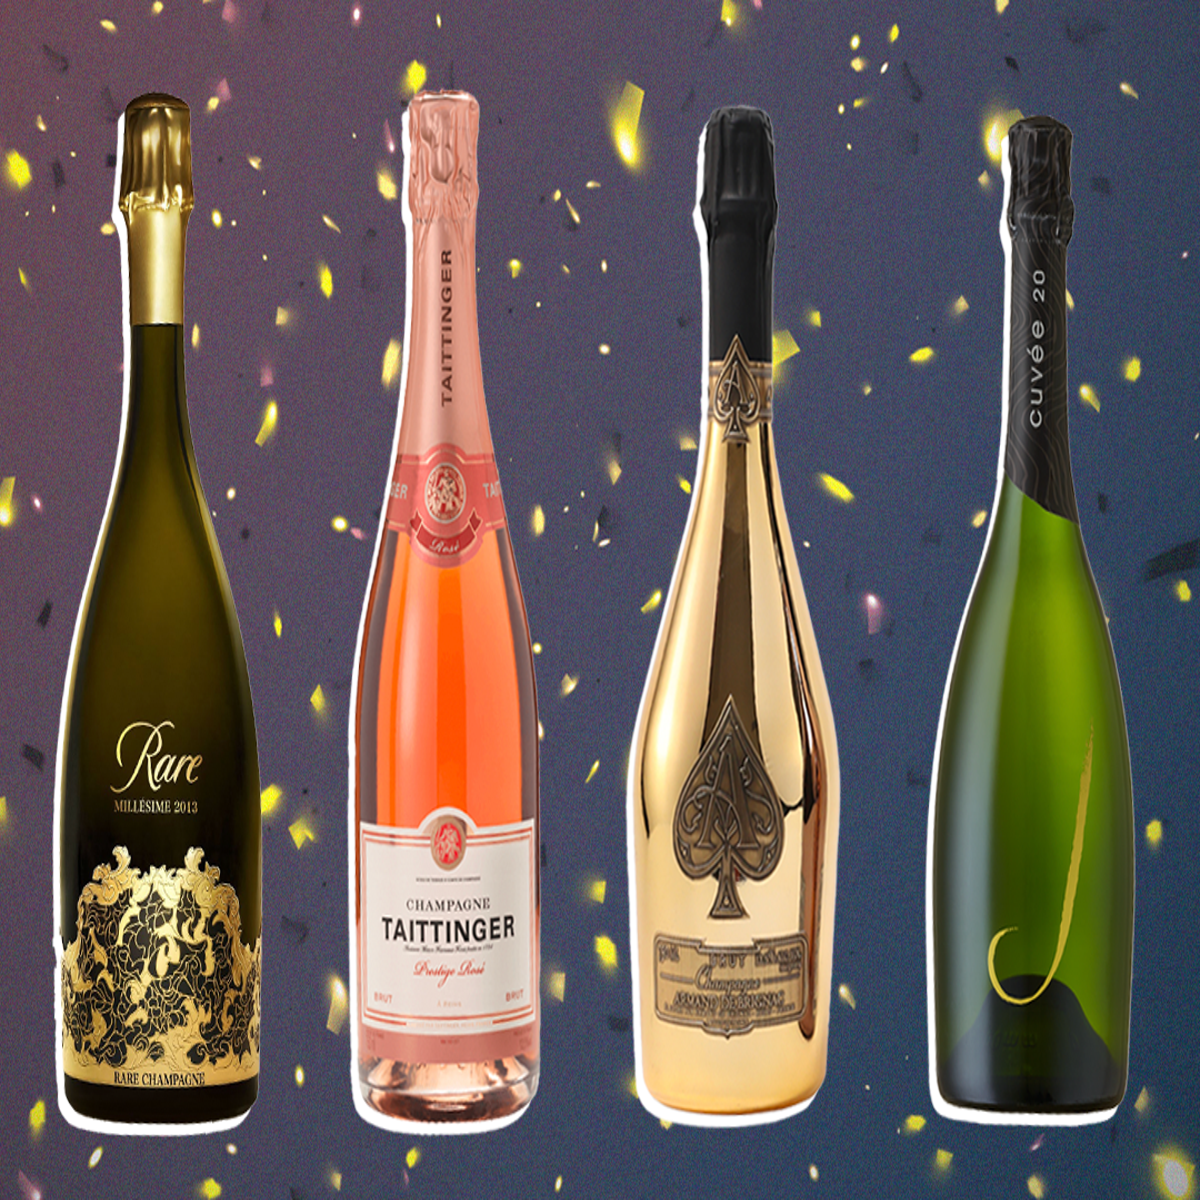 https://static.independent.co.uk/2023/10/25/12/best%20sparkling%20wines%20for%20christmas.png?width=1200&height=1200&fit=crop